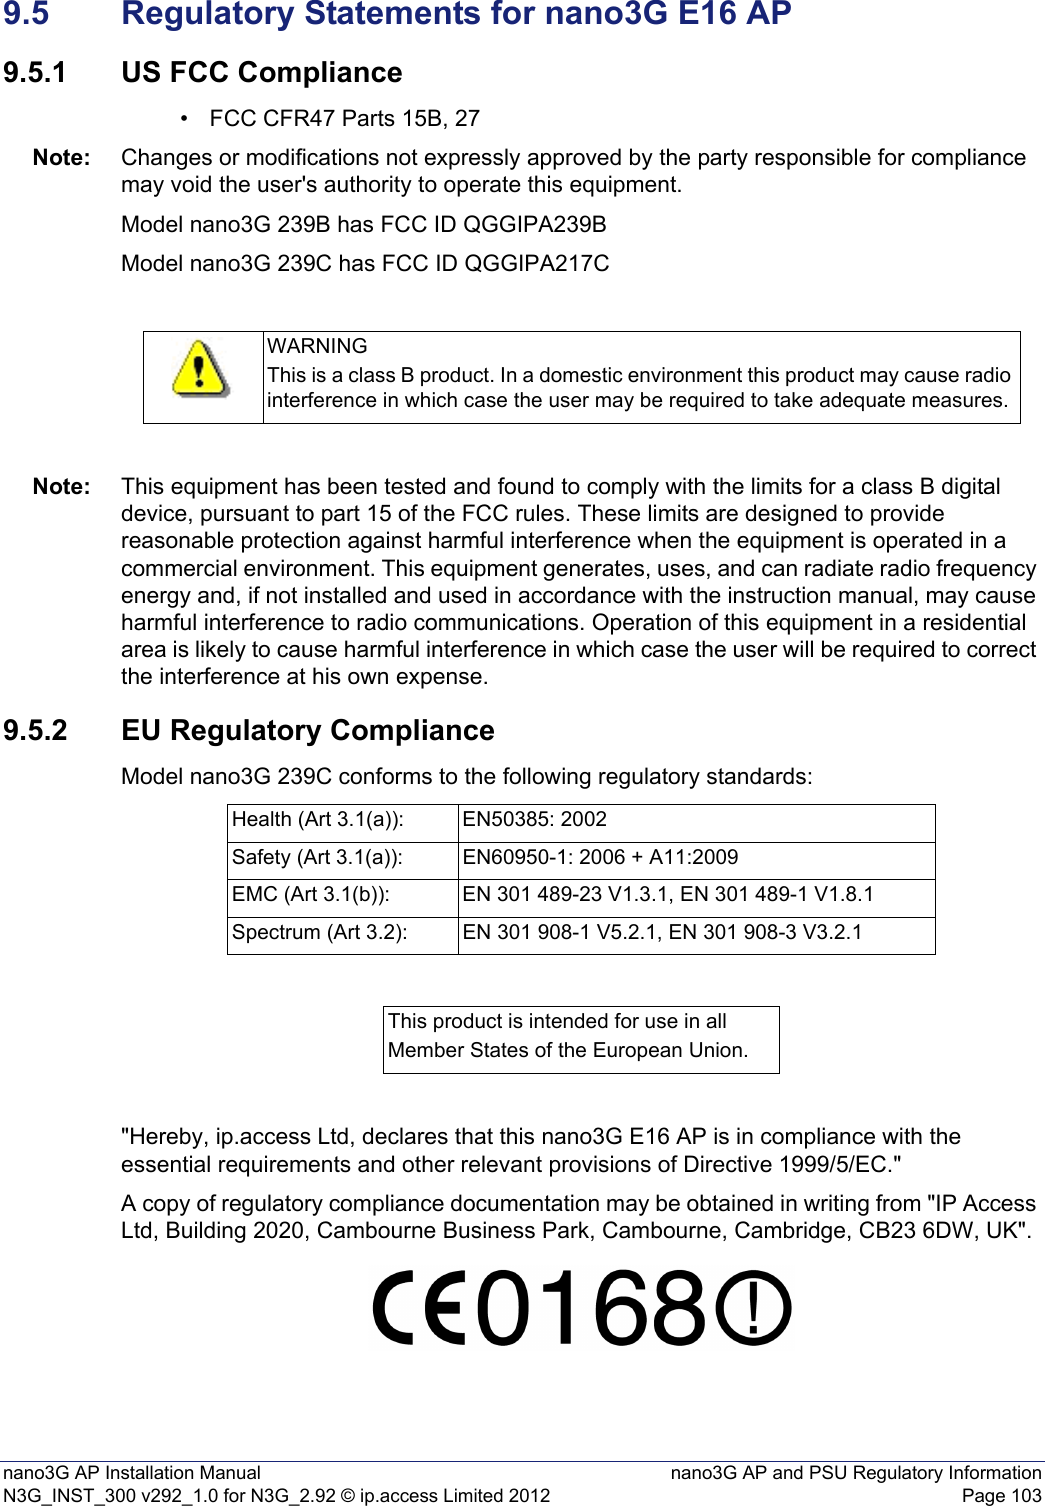 nano3G AP Installation Manual nano3G AP and PSU Regulatory InformationN3G_INST_300 v292_1.0 for N3G_2.92 © ip.access Limited 2012 Page 1039.5 Regulatory Statements for nano3G E16 AP9.5.1 US FCC Compliance• FCC CFR47 Parts 15B, 27Note: Changes or modifications not expressly approved by the party responsible for compliance may void the user&apos;s authority to operate this equipment.Model nano3G 239B has FCC ID QGGIPA239BModel nano3G 239C has FCC ID QGGIPA217CNote: This equipment has been tested and found to comply with the limits for a class B digital device, pursuant to part 15 of the FCC rules. These limits are designed to provide reasonable protection against harmful interference when the equipment is operated in a commercial environment. This equipment generates, uses, and can radiate radio frequency energy and, if not installed and used in accordance with the instruction manual, may cause harmful interference to radio communications. Operation of this equipment in a residential area is likely to cause harmful interference in which case the user will be required to correct the interference at his own expense.9.5.2 EU Regulatory ComplianceModel nano3G 239C conforms to the following regulatory standards:&quot;Hereby, ip.access Ltd, declares that this nano3G E16 AP is in compliance with the essential requirements and other relevant provisions of Directive 1999/5/EC.&quot;A copy of regulatory compliance documentation may be obtained in writing from &quot;IP Access Ltd, Building 2020, Cambourne Business Park, Cambourne, Cambridge, CB23 6DW, UK&quot;.WARNINGThis is a class B product. In a domestic environment this product may cause radio interference in which case the user may be required to take adequate measures.Health (Art 3.1(a)): EN50385: 2002Safety (Art 3.1(a)): EN60950-1: 2006 + A11:2009EMC (Art 3.1(b)): EN 301 489-23 V1.3.1, EN 301 489-1 V1.8.1Spectrum (Art 3.2): EN 301 908-1 V5.2.1, EN 301 908-3 V3.2.1This product is intended for use in allMember States of the European Union.